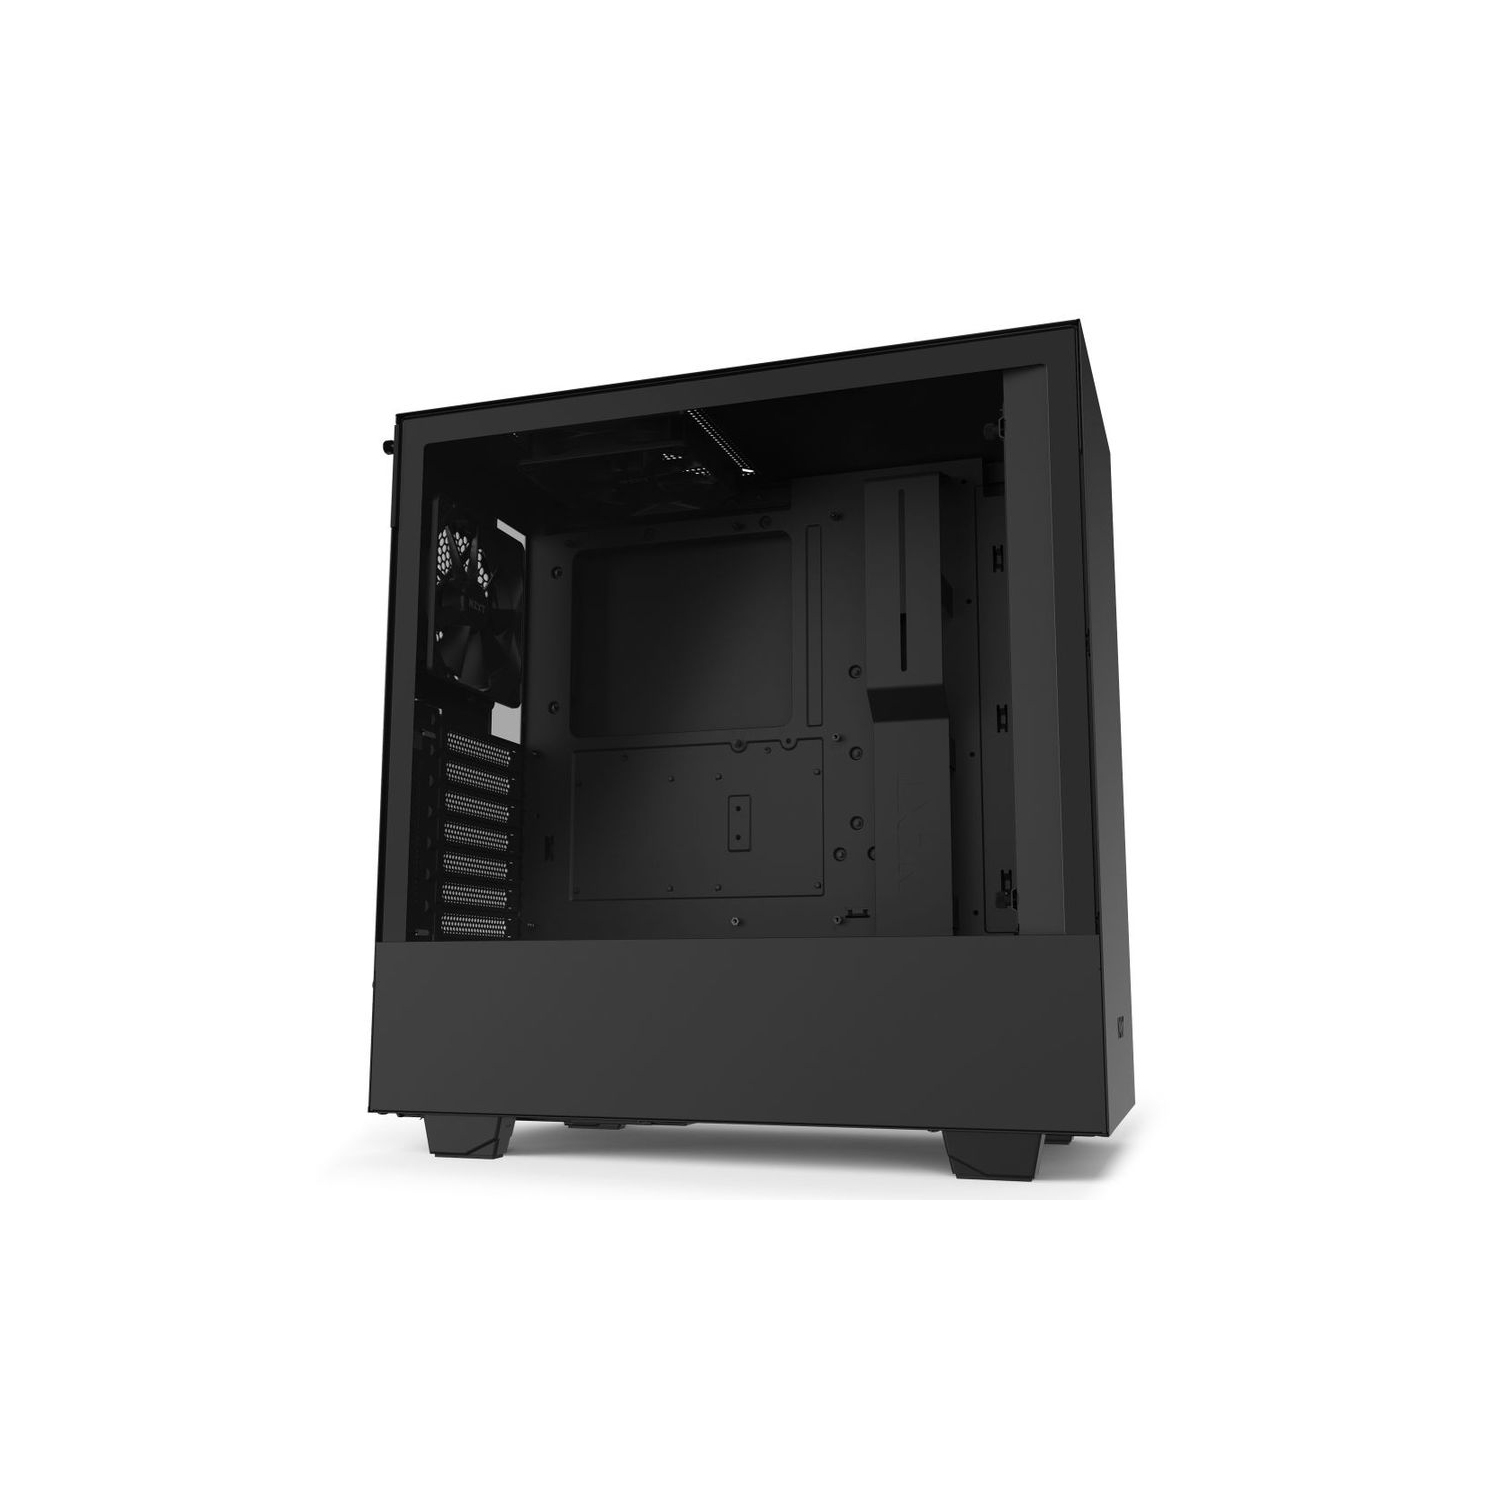 NZXT H510 - Compact ATX Mid-Tower Case - Front I/O USB Type-C Port - Tempered Glass Side Panel - Black (CA-H510B-B1)